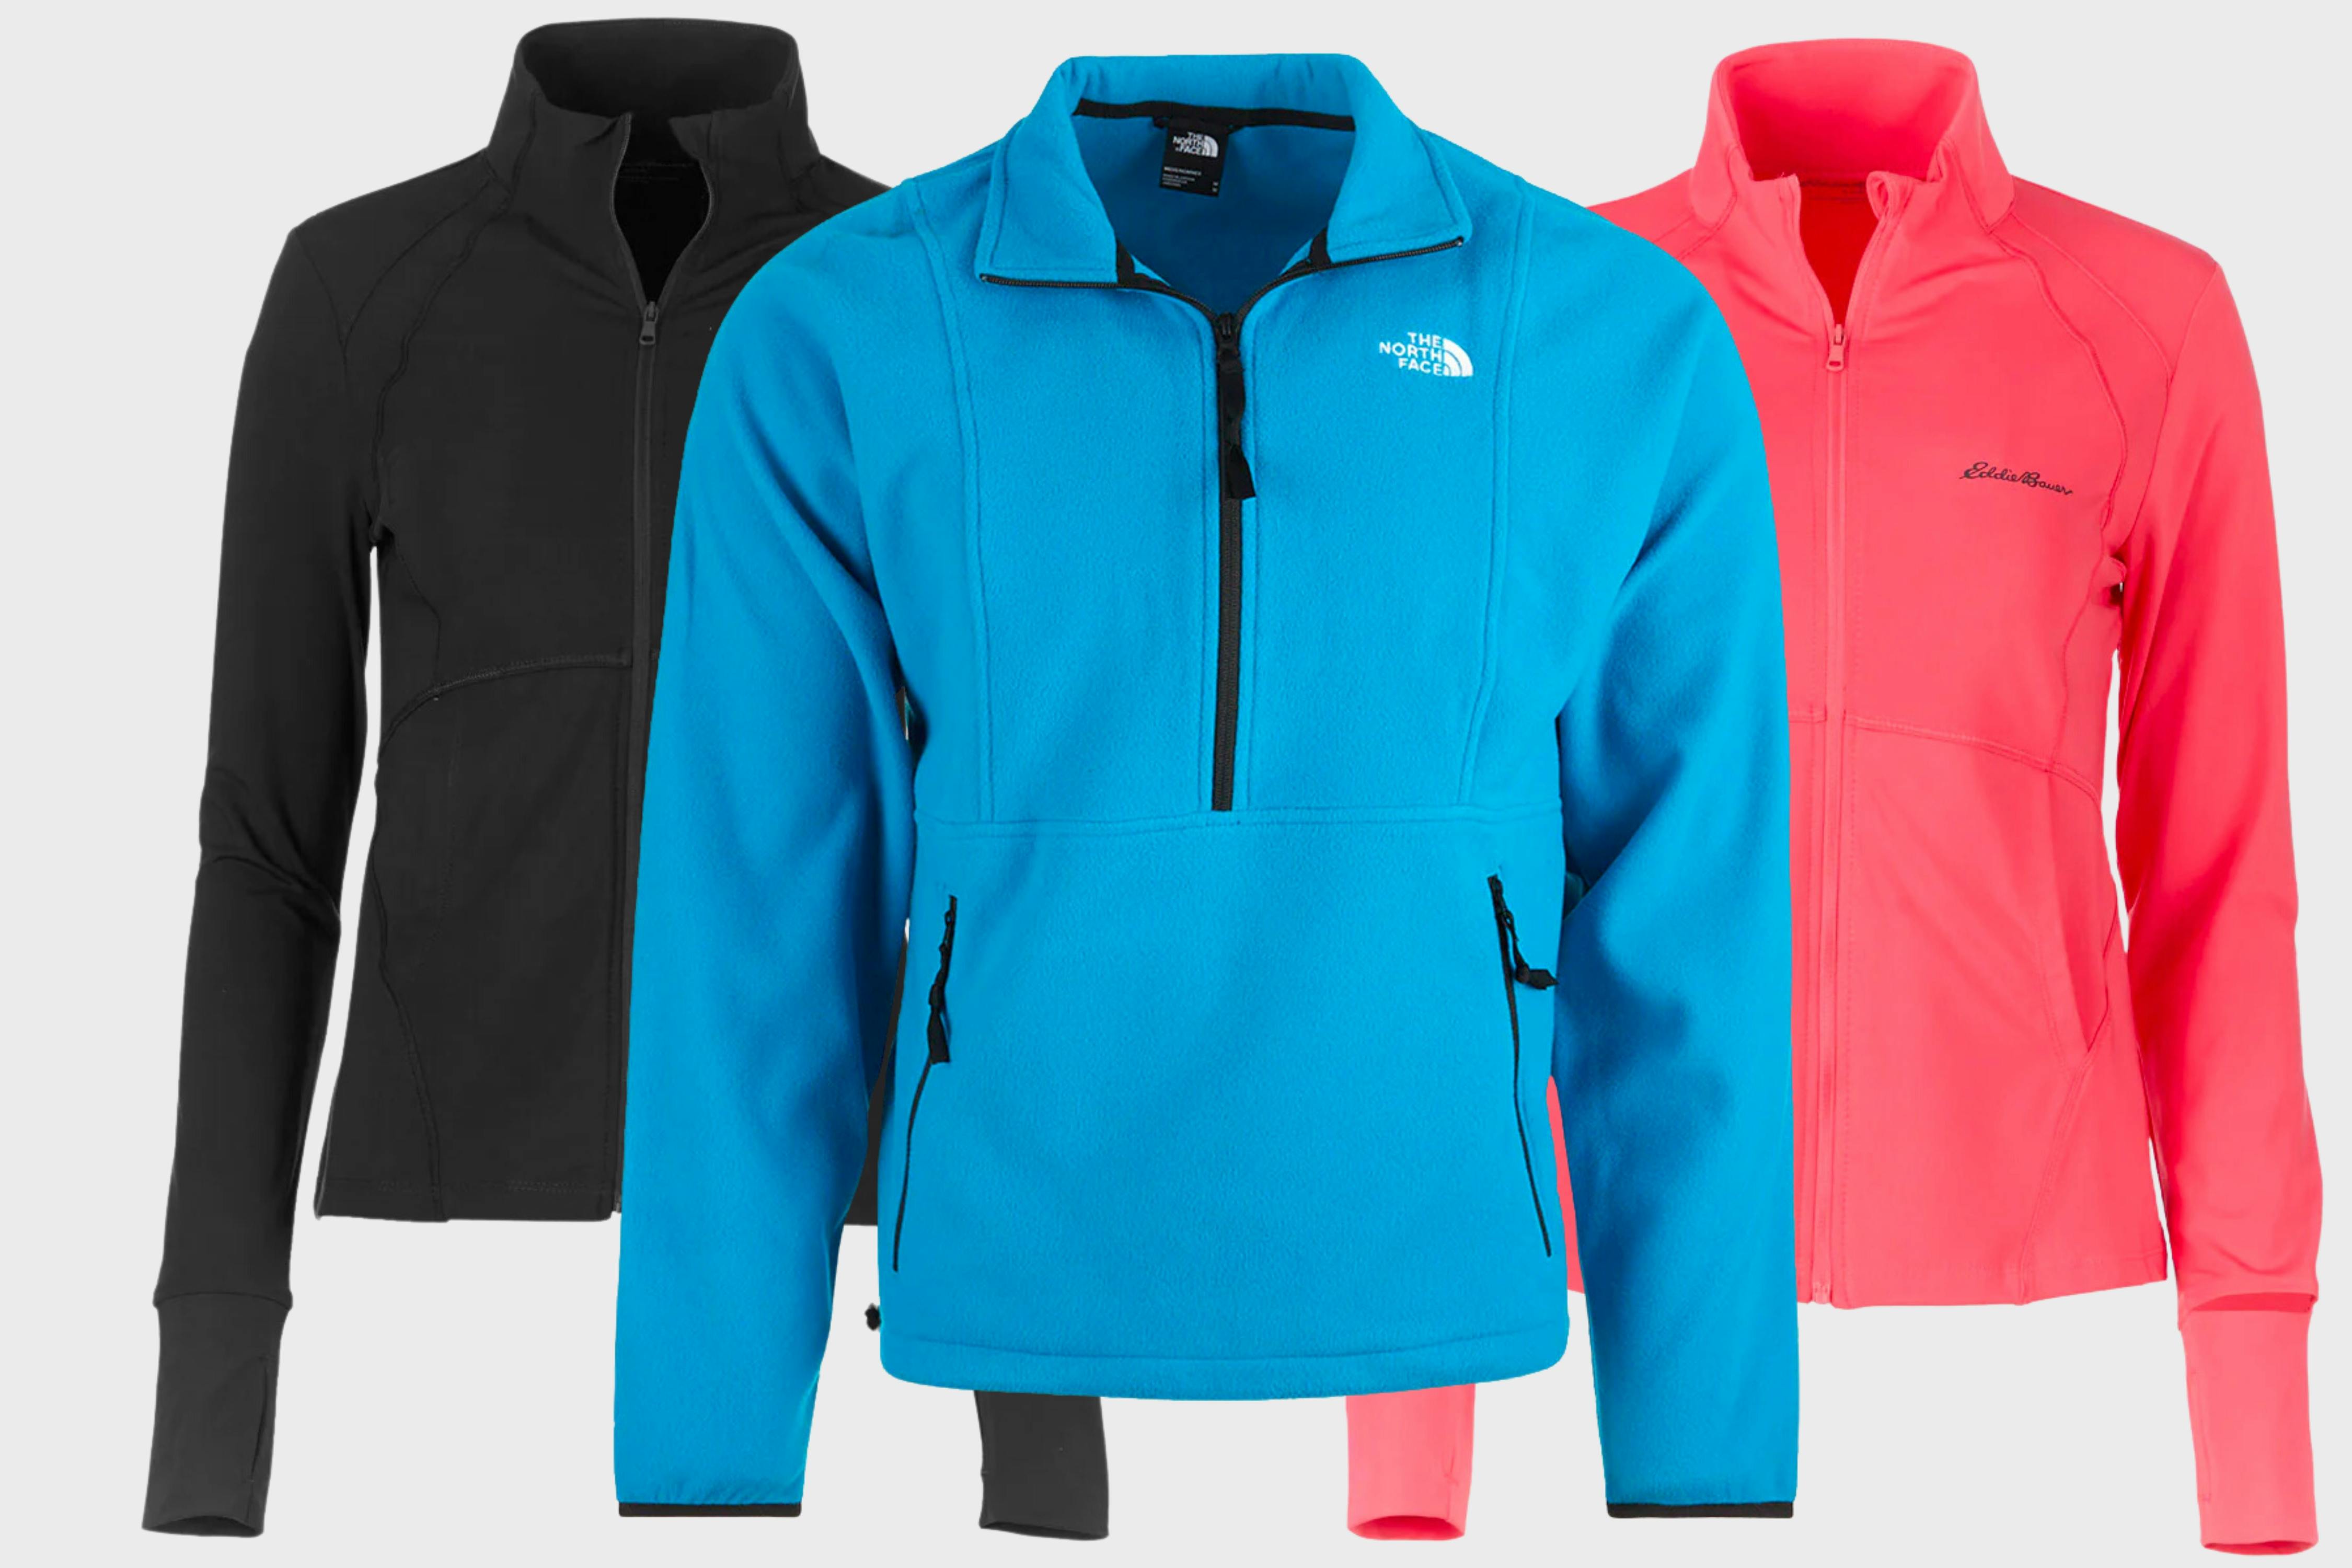 B1G1 Free Jackets — $19 Eddie Bauer, $39 The North Face + Free Shipping ...